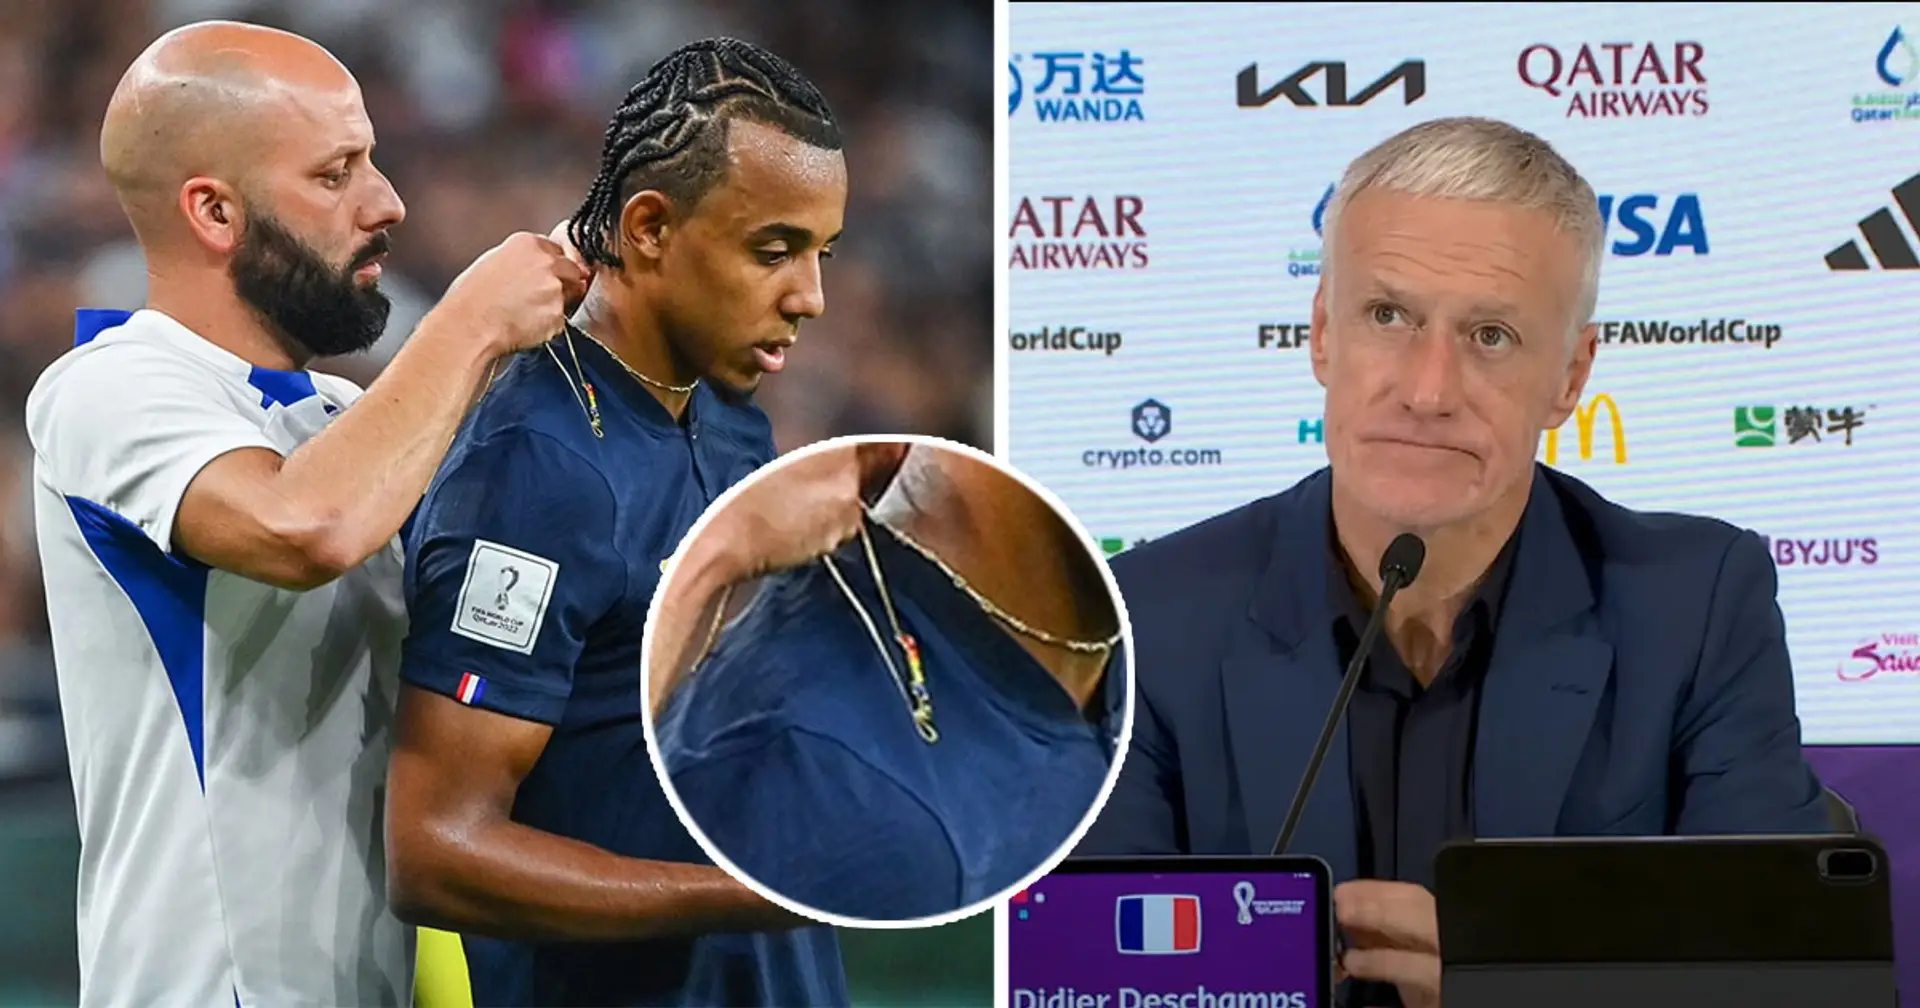 Kounde wore chain in rainbow colours during World Cup game - Deschamps reveals if he knew about it